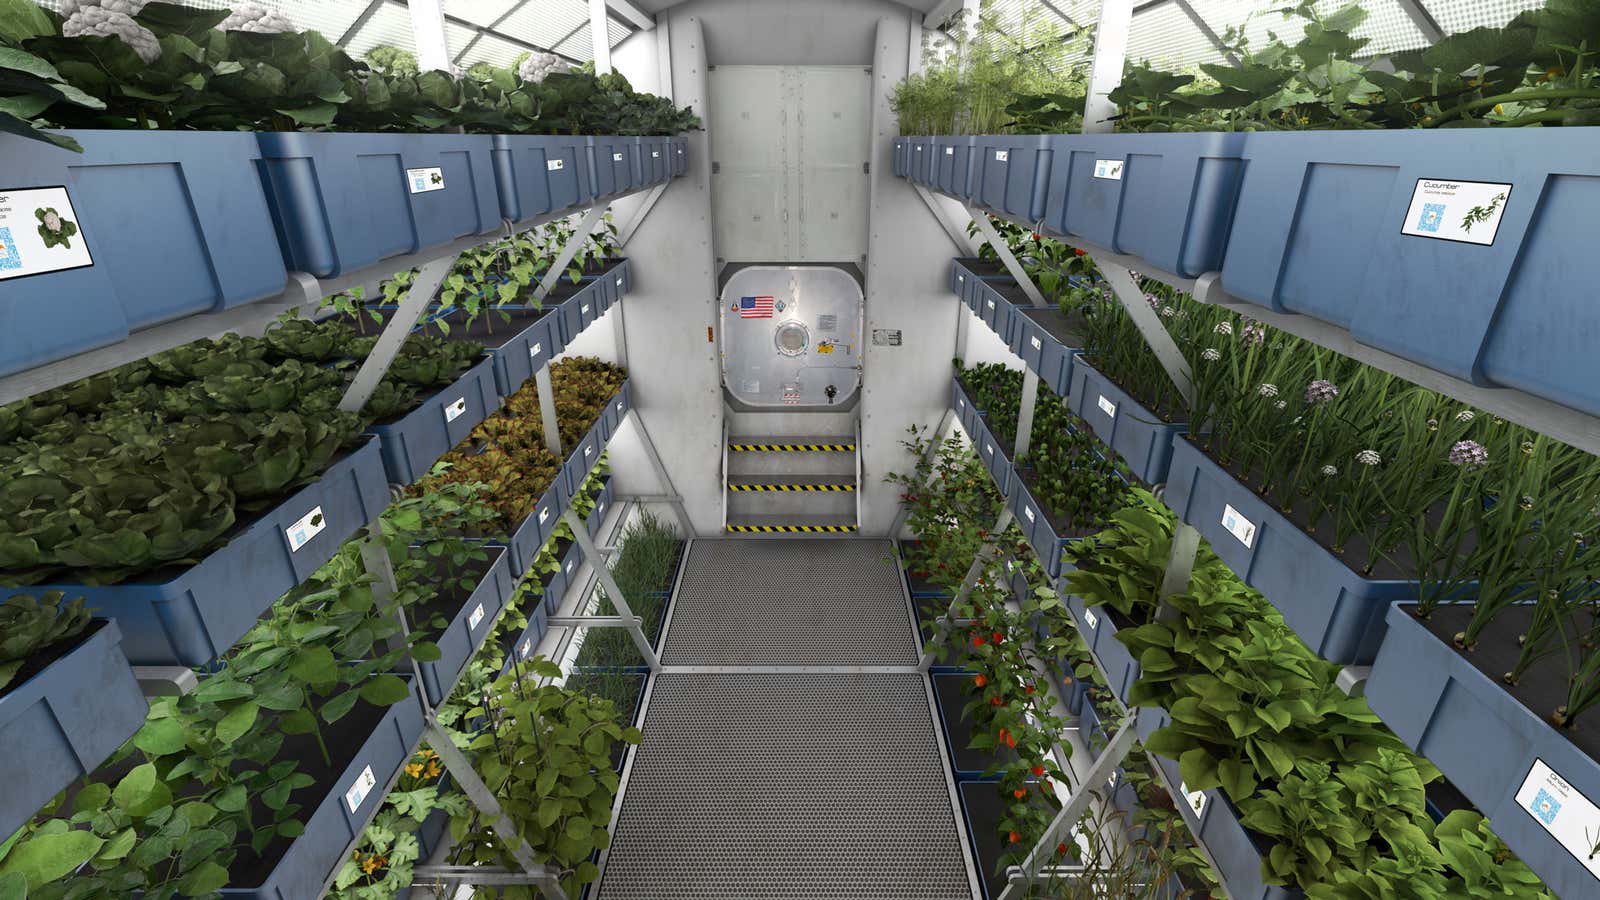 Space gardens of the future?